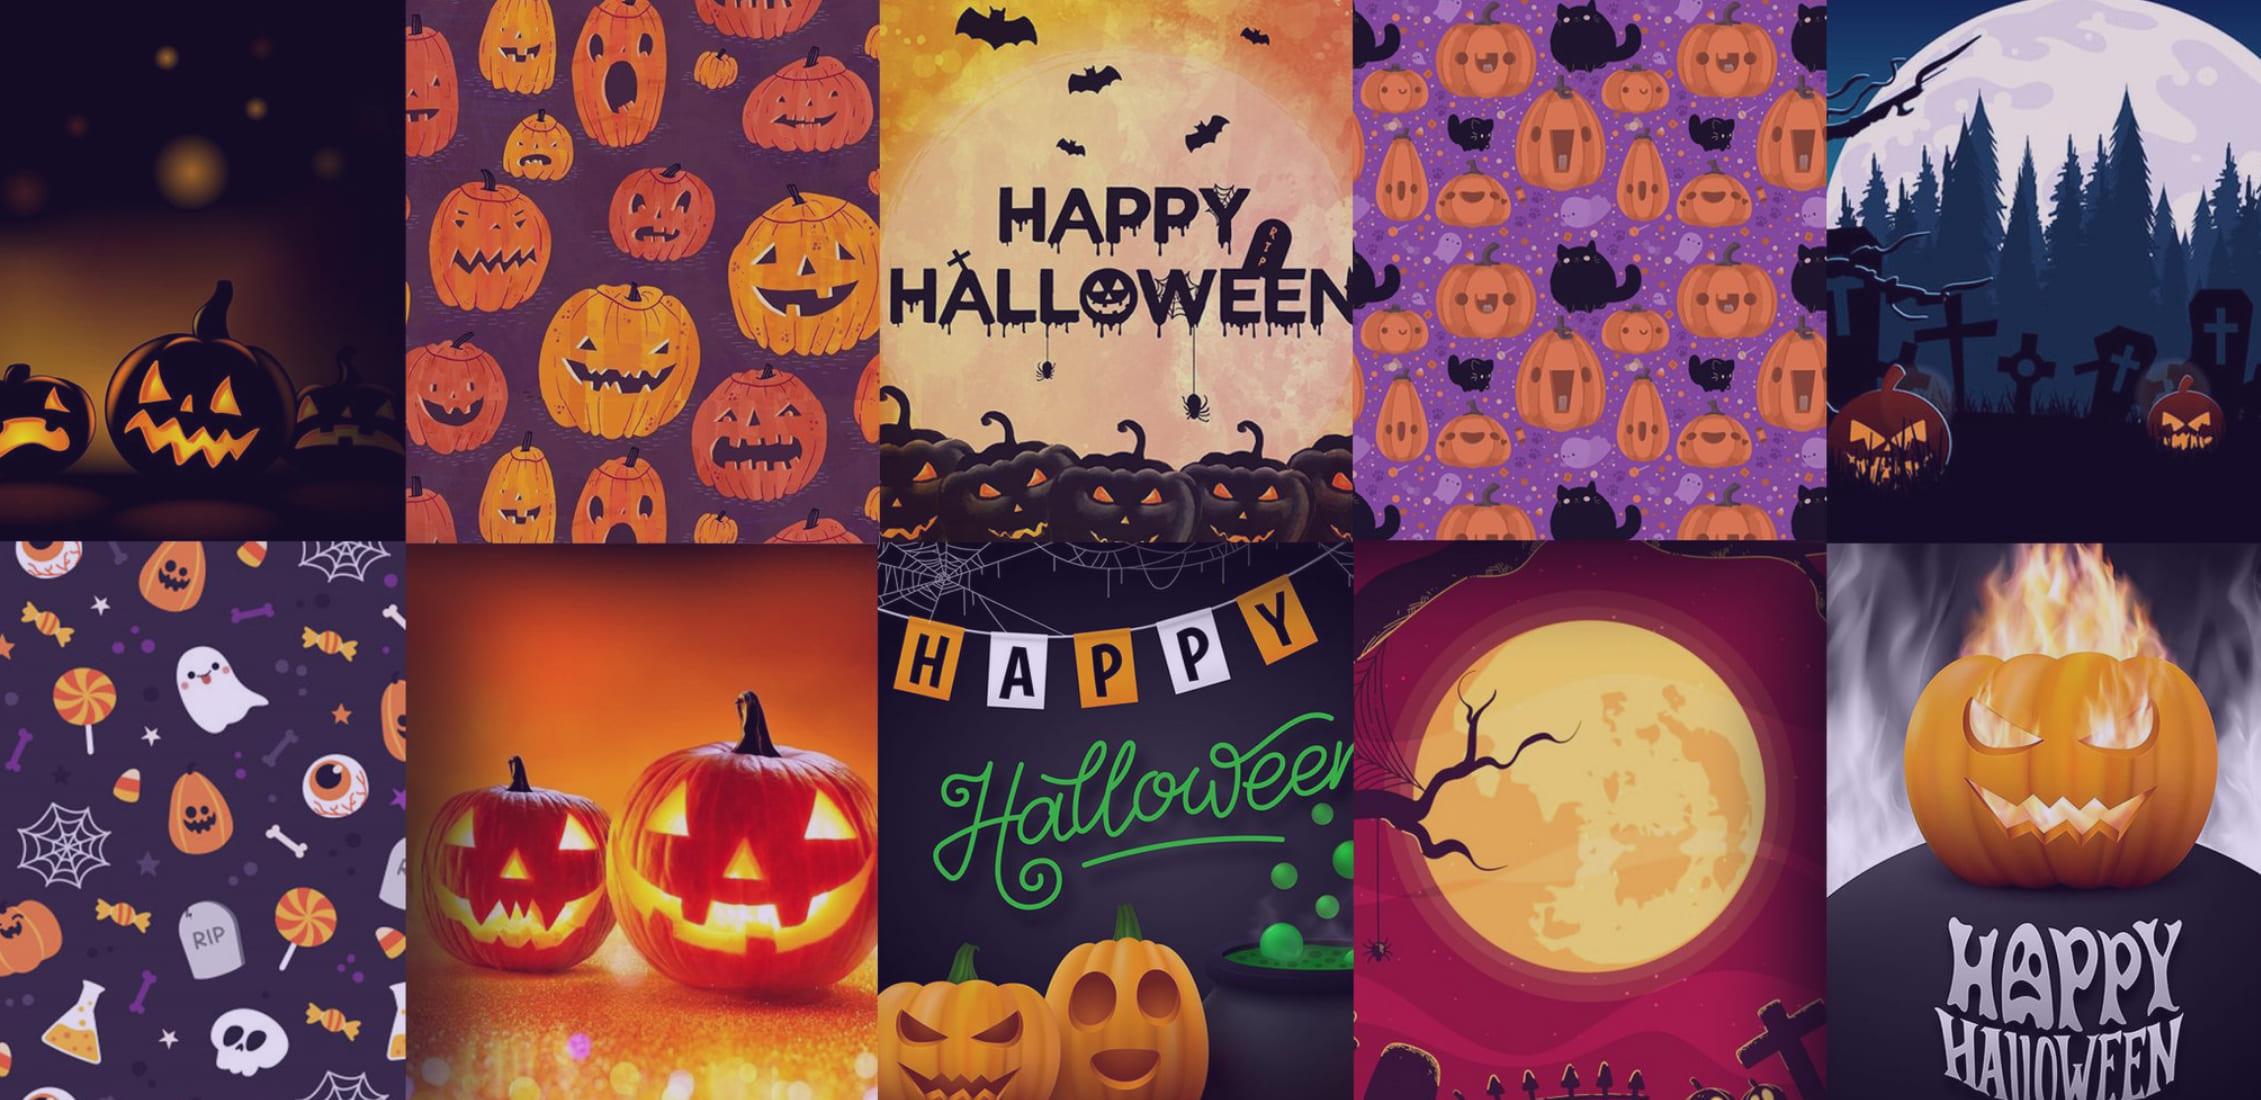 Best Halloween Background Image 2021. Scary & Cute Background